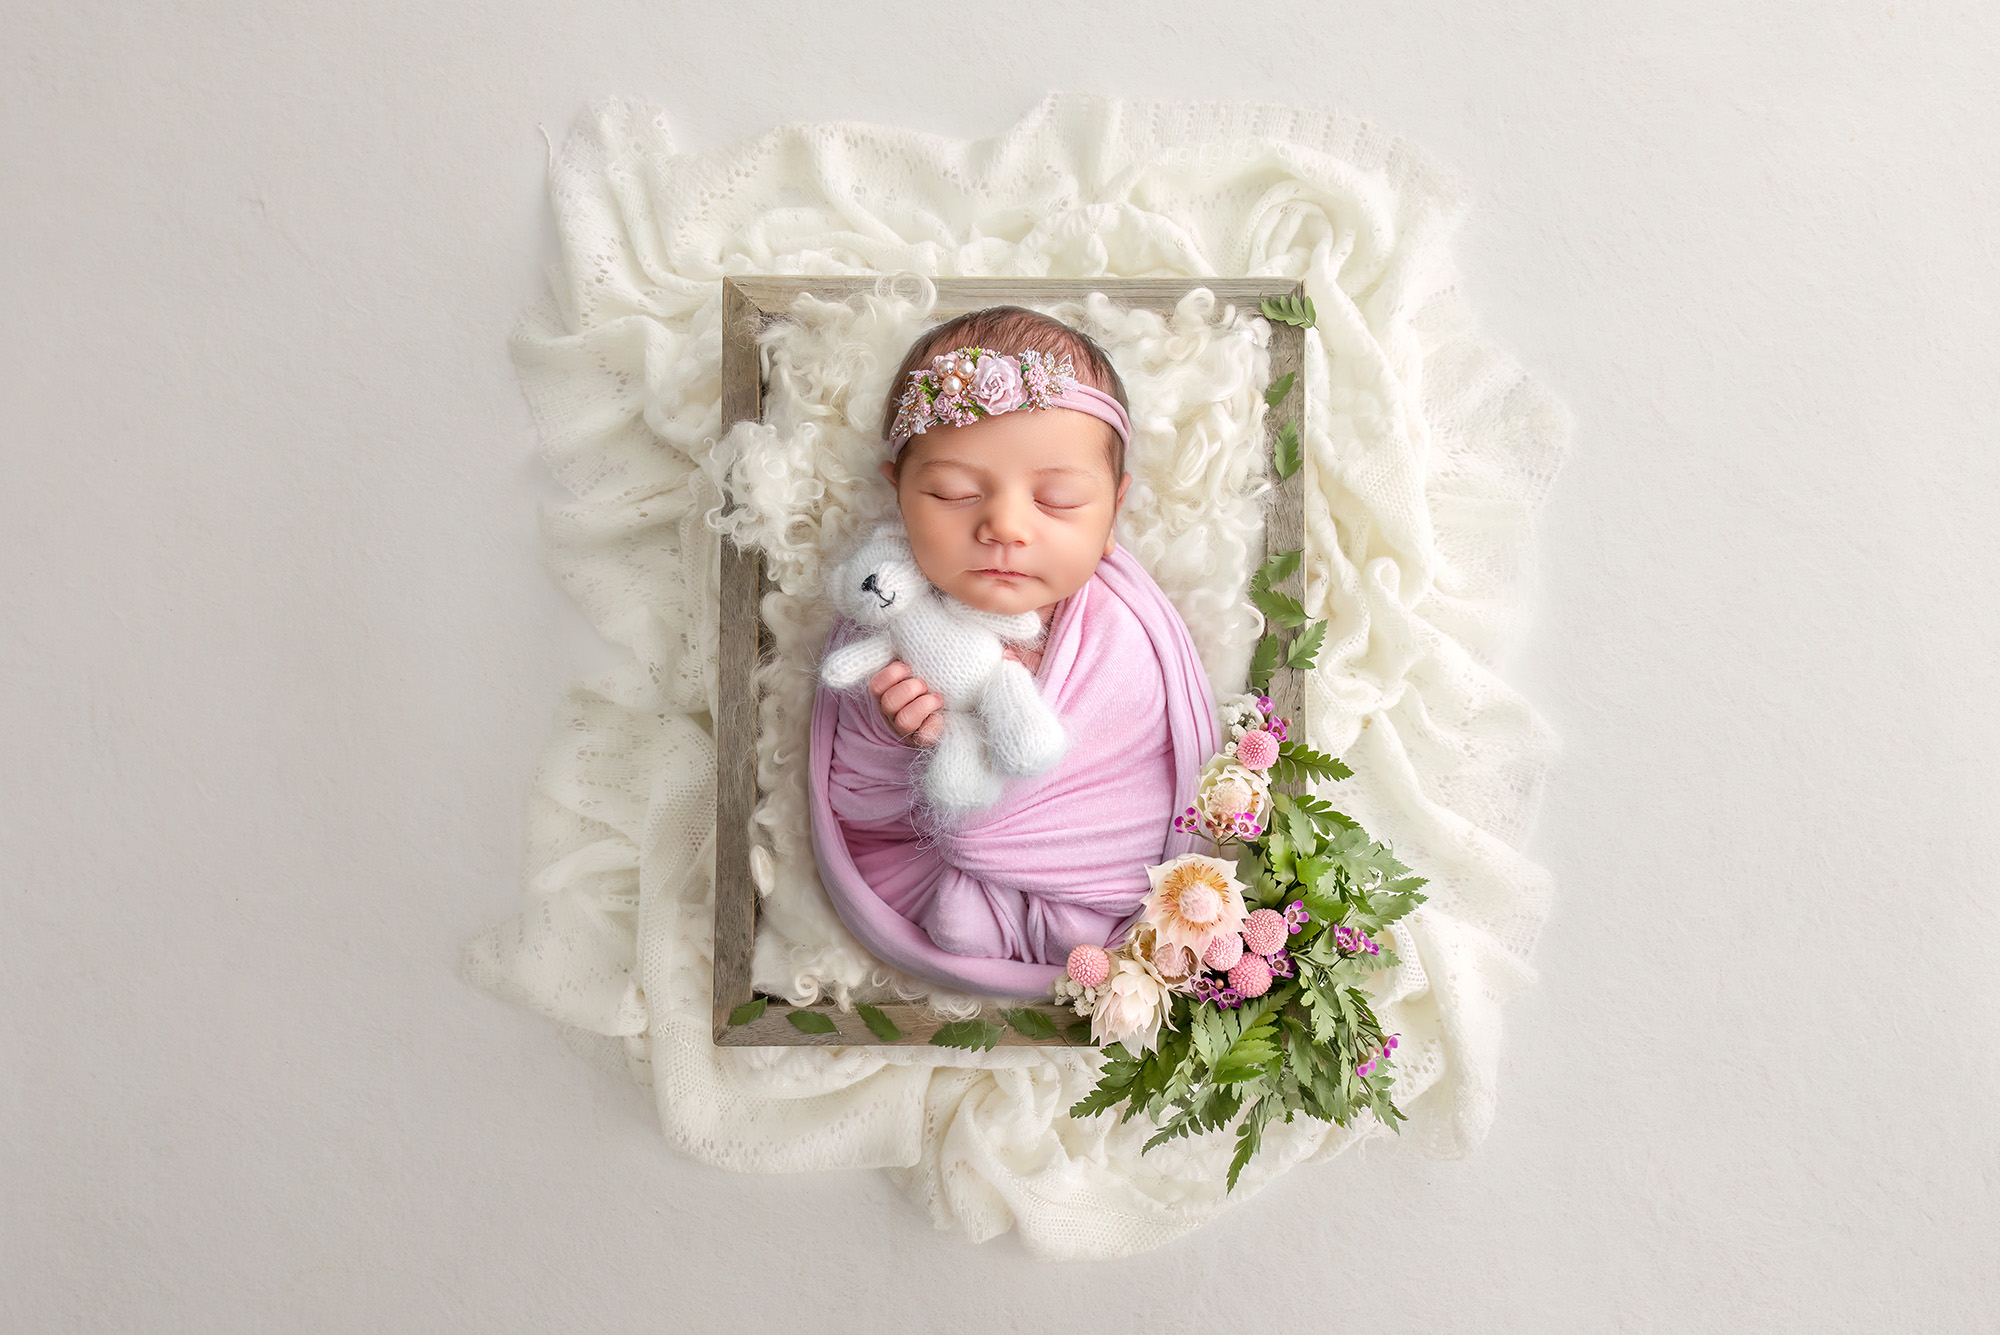 Newborn baby girl laying in a wooden crate with lace behind her and florals beside her